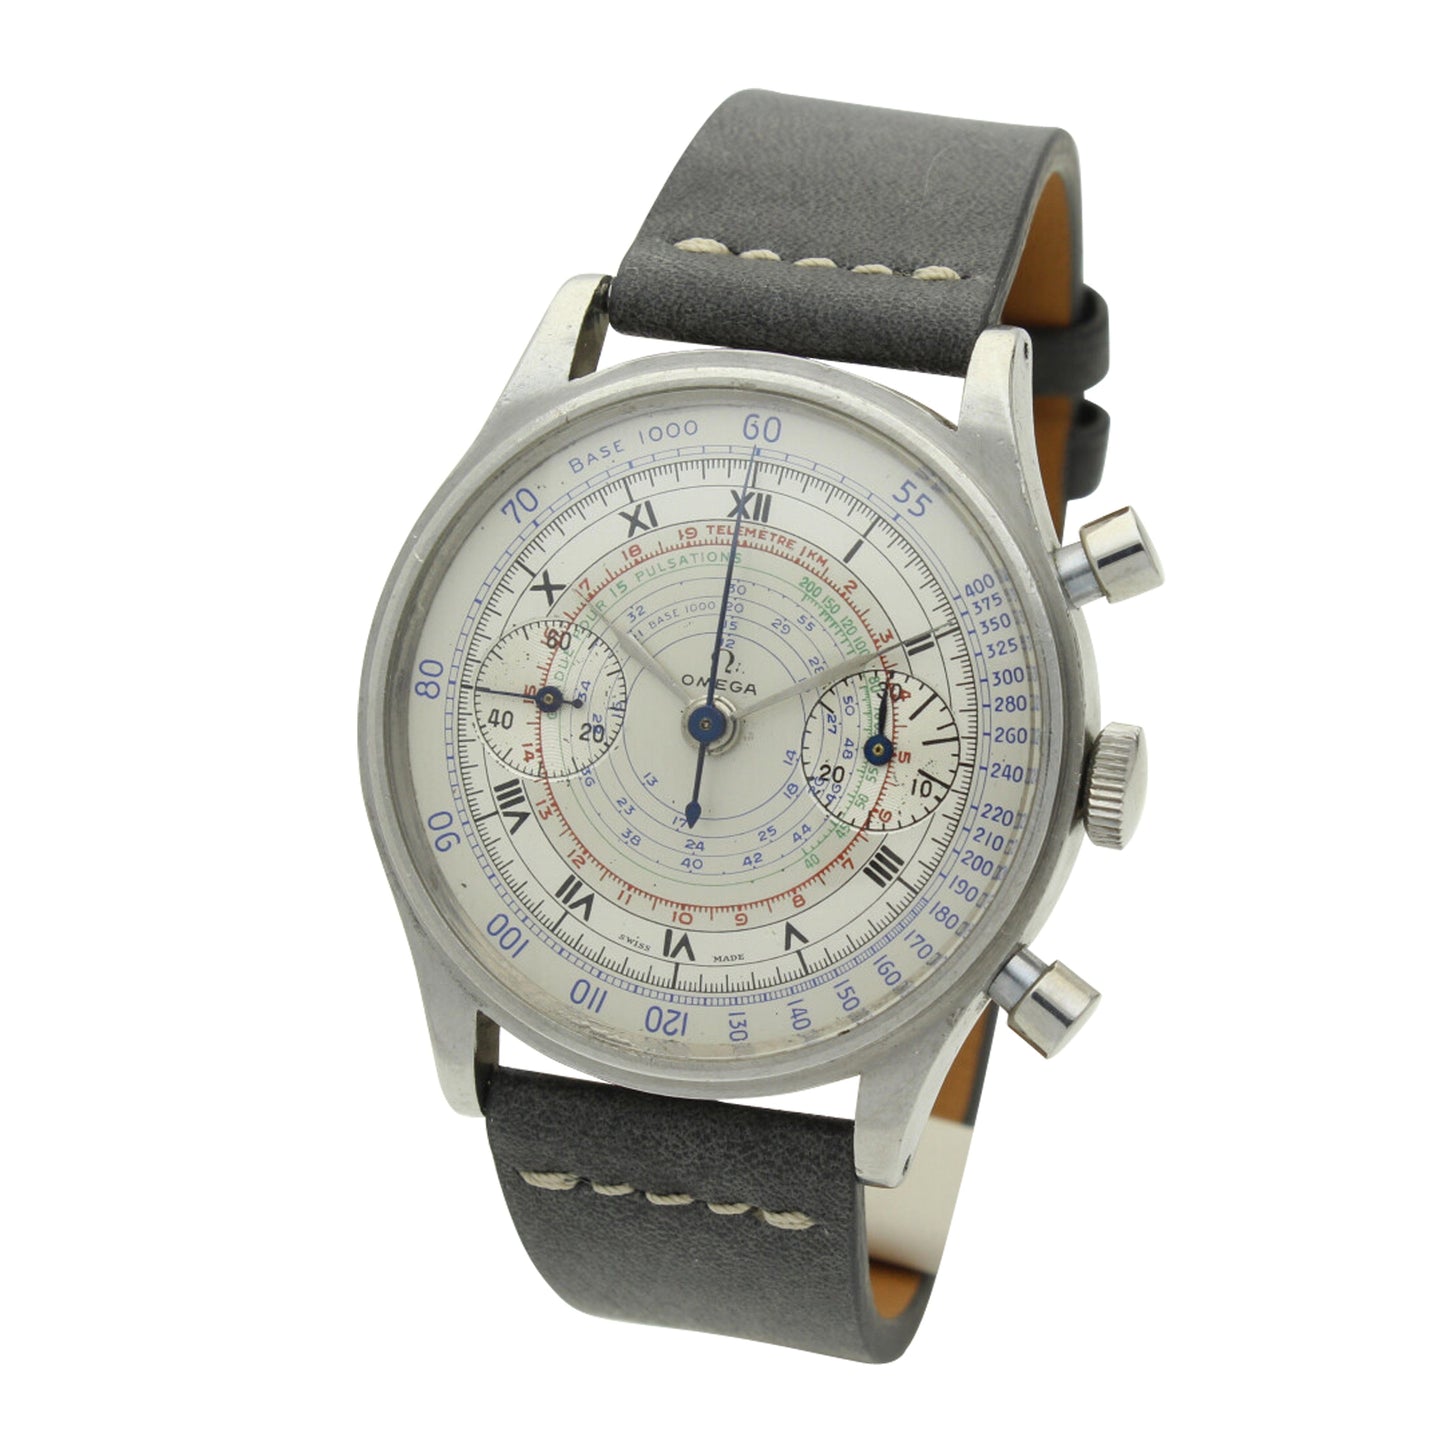 Stainless steel chronograph wristwatch. Made 1948